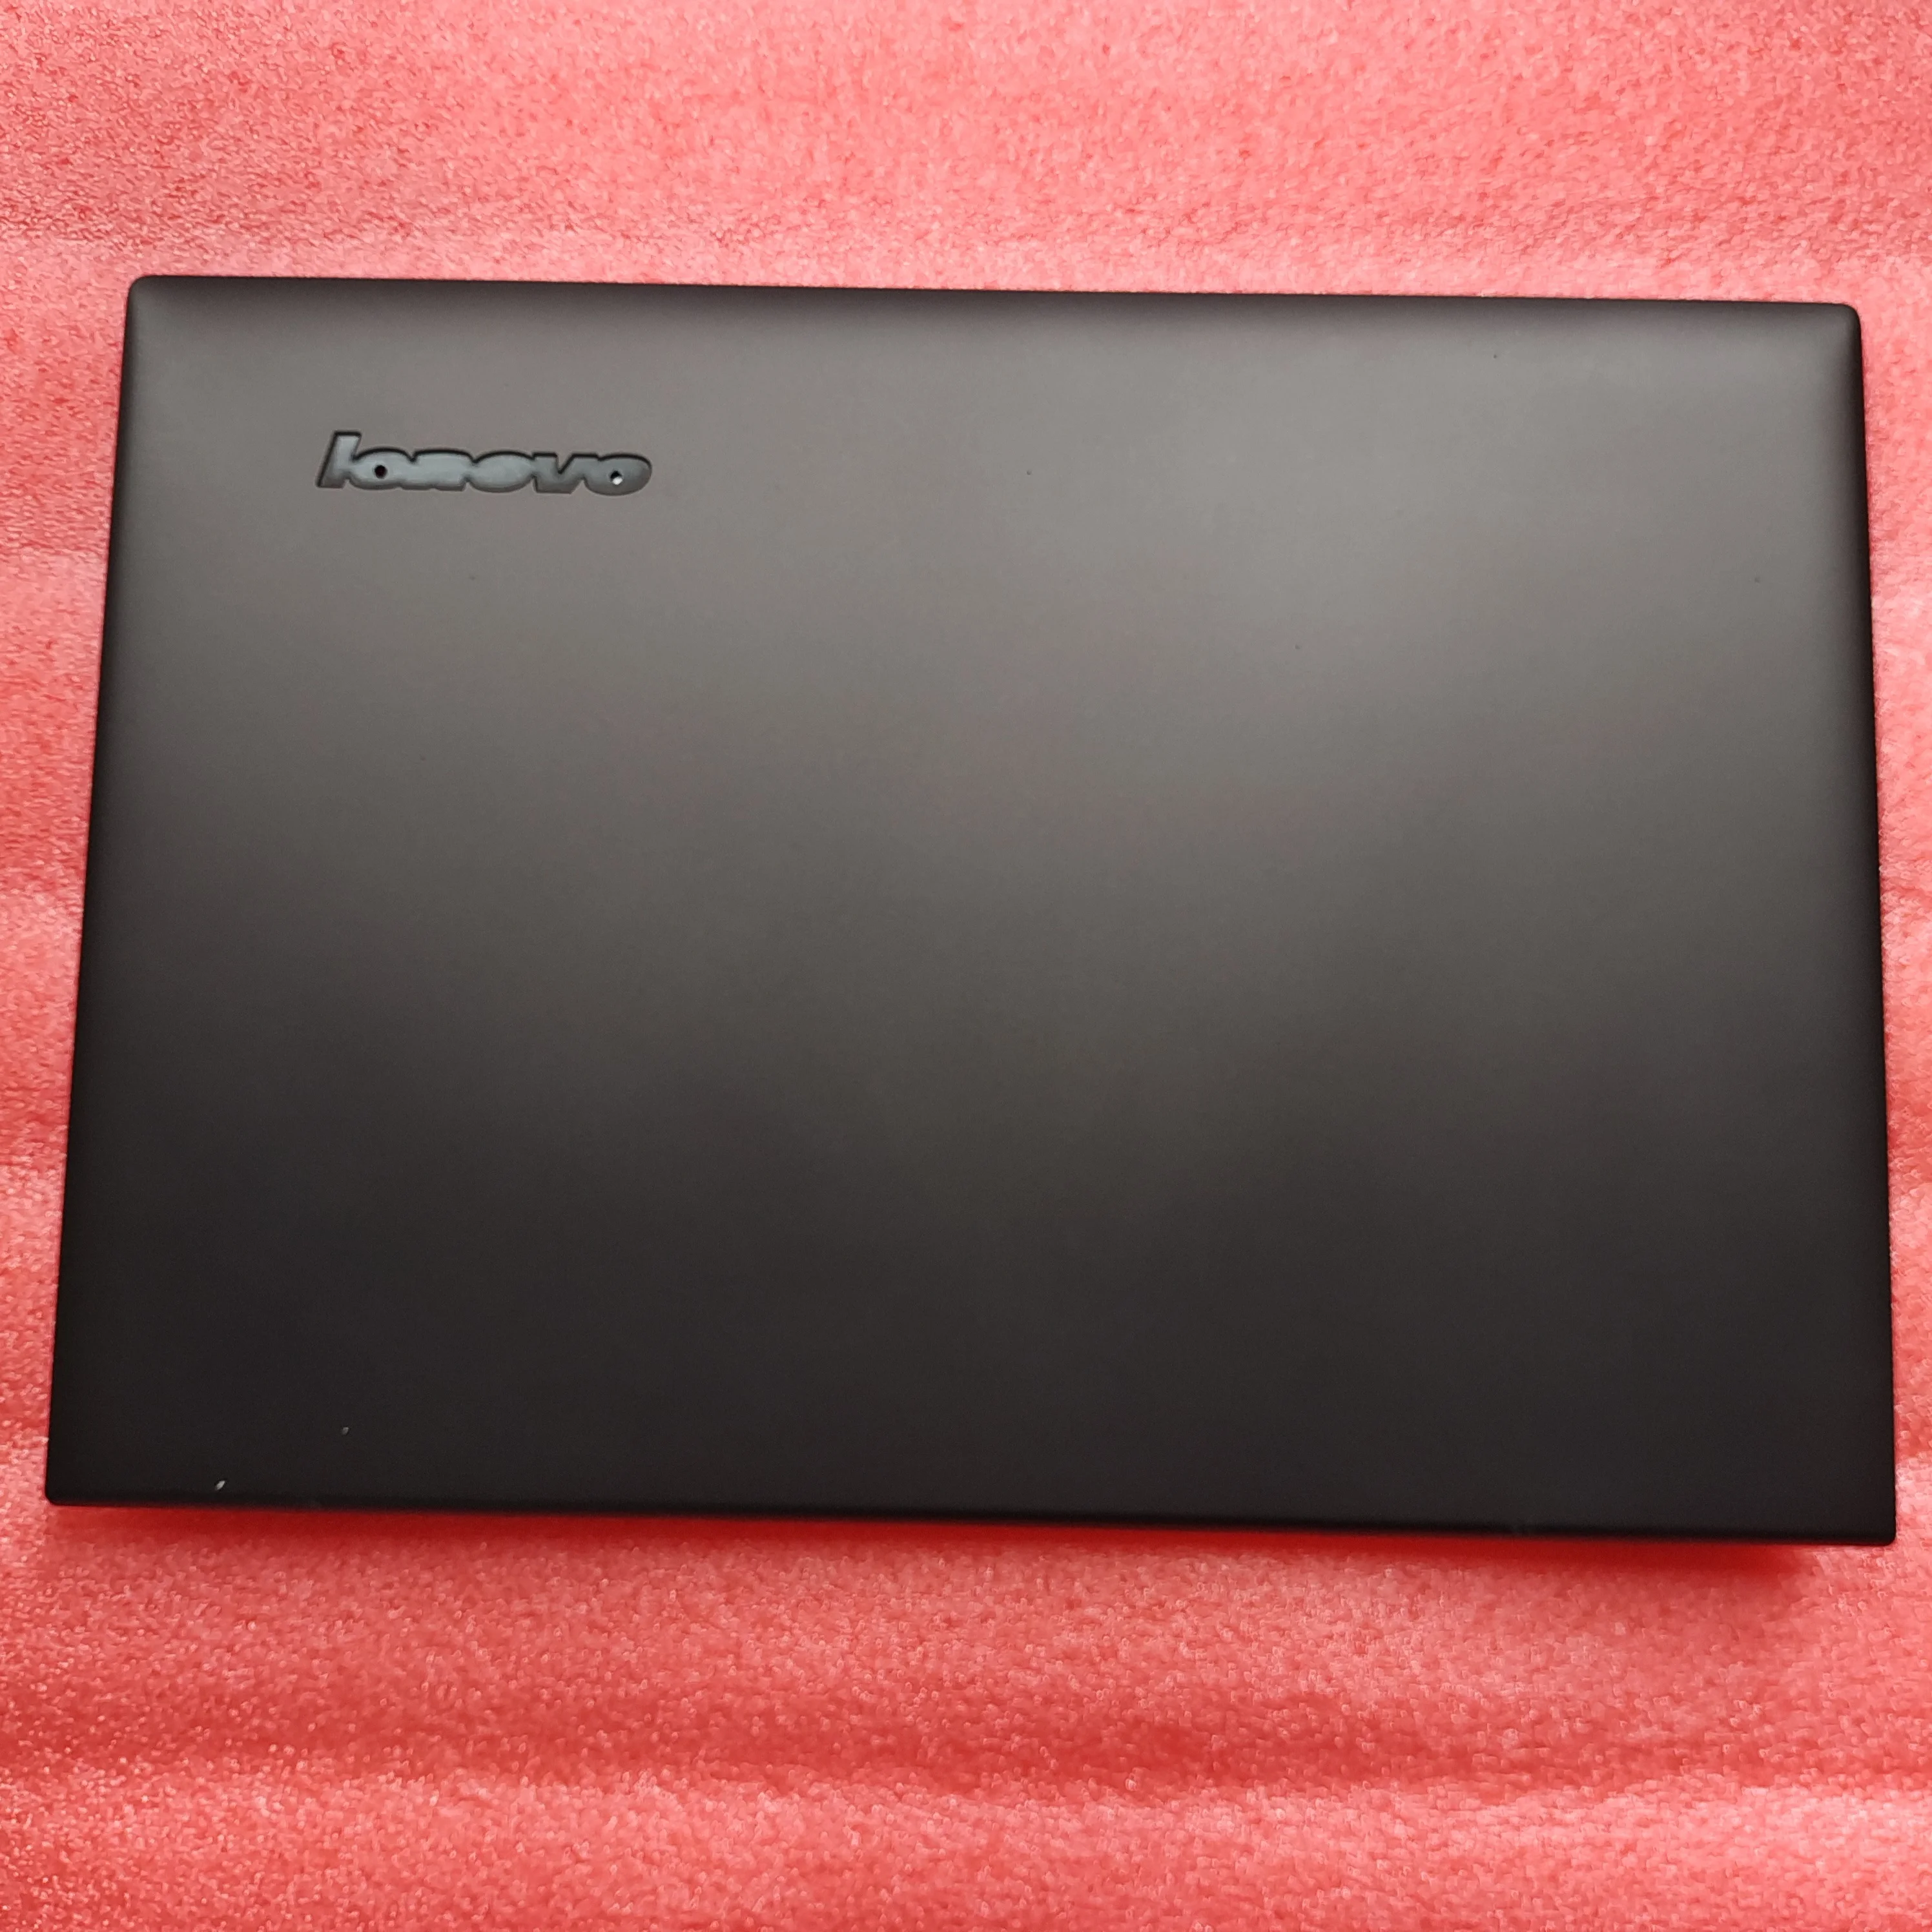 

New Original for Lenovo IdeaPad Z500 Lcd Rear Cover Back Case Top Lid Brown no touch AP0SY000110 AP0SY000140